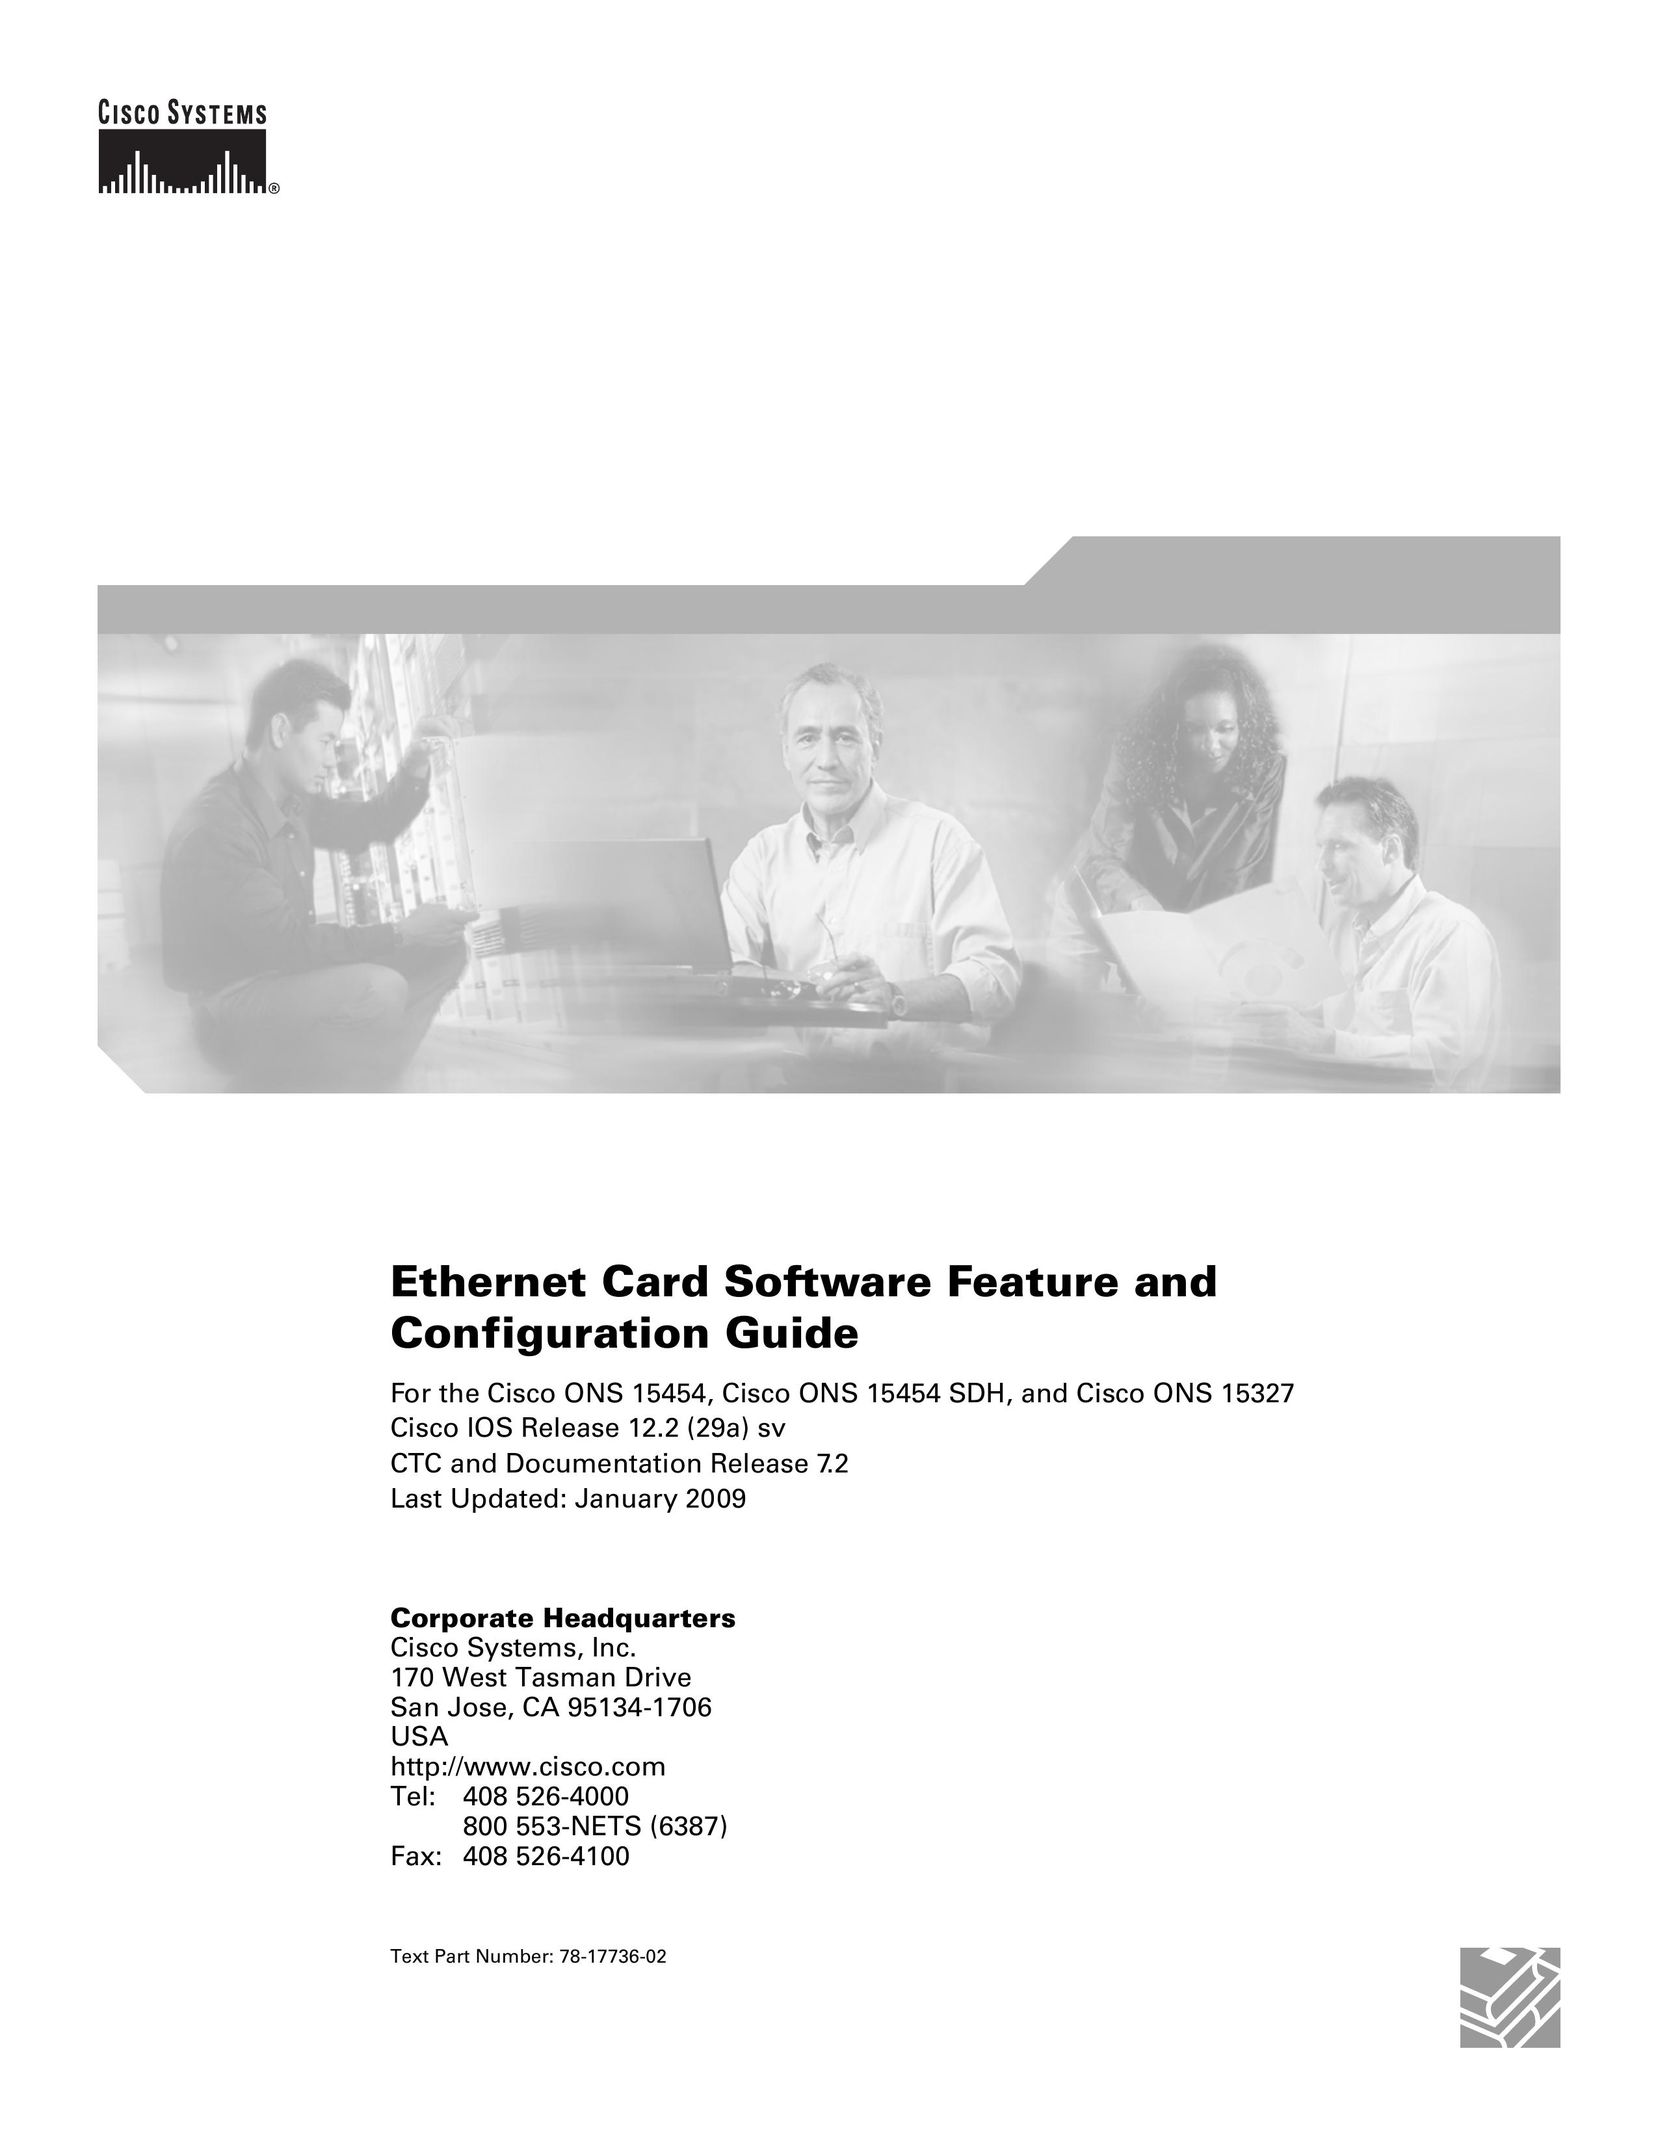 Cisco Systems 15327 Network Card User Manual